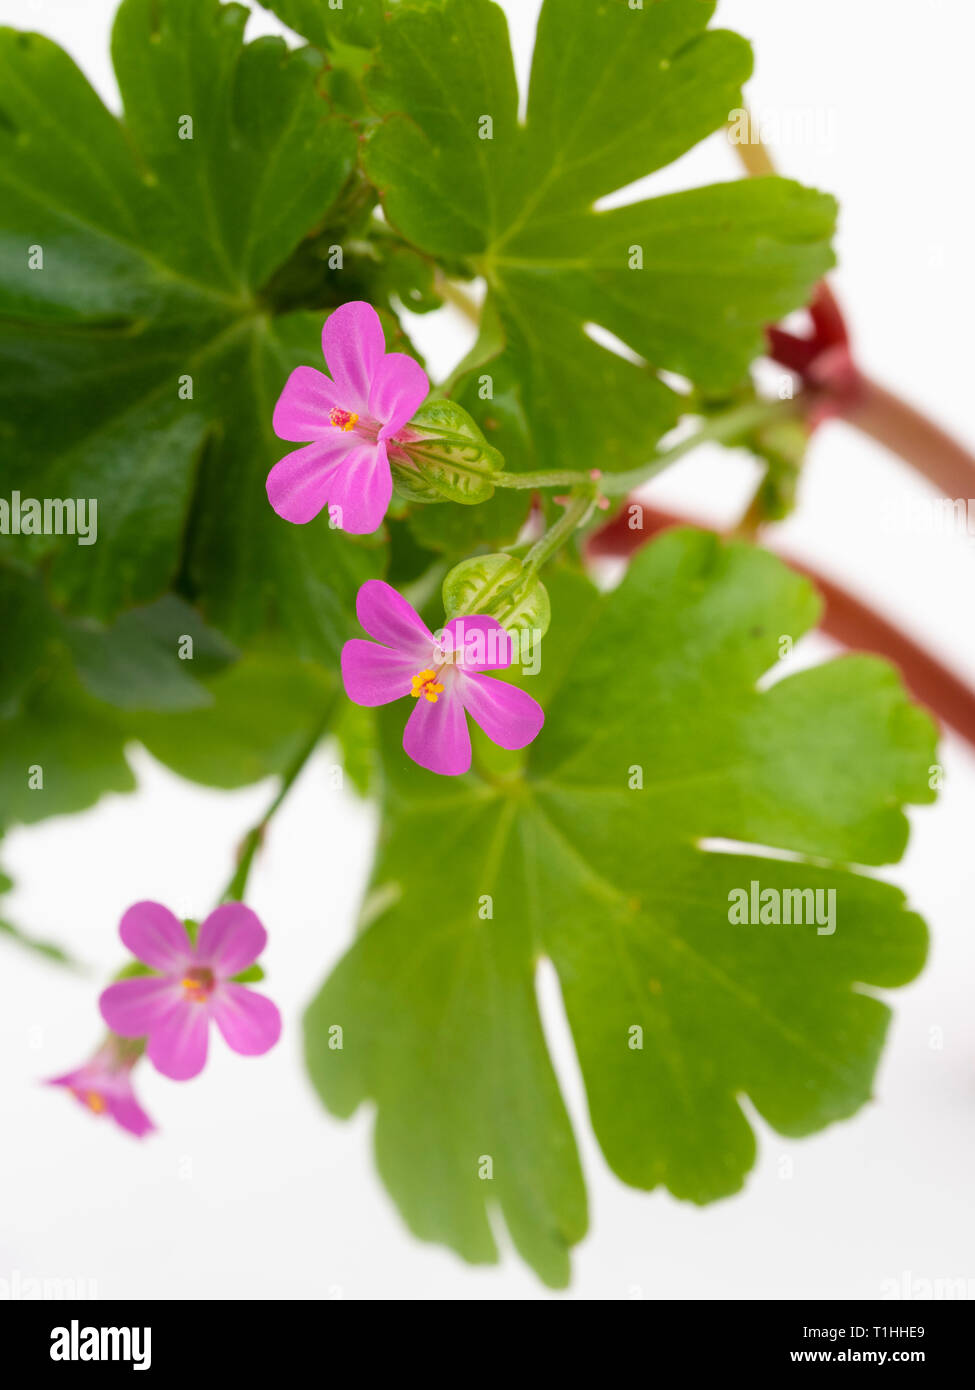 Small pink flowers and glossy foliage of the UK wildflower and annual garden weed, Geranium lucidum, shiny cranesbill Stock Photo